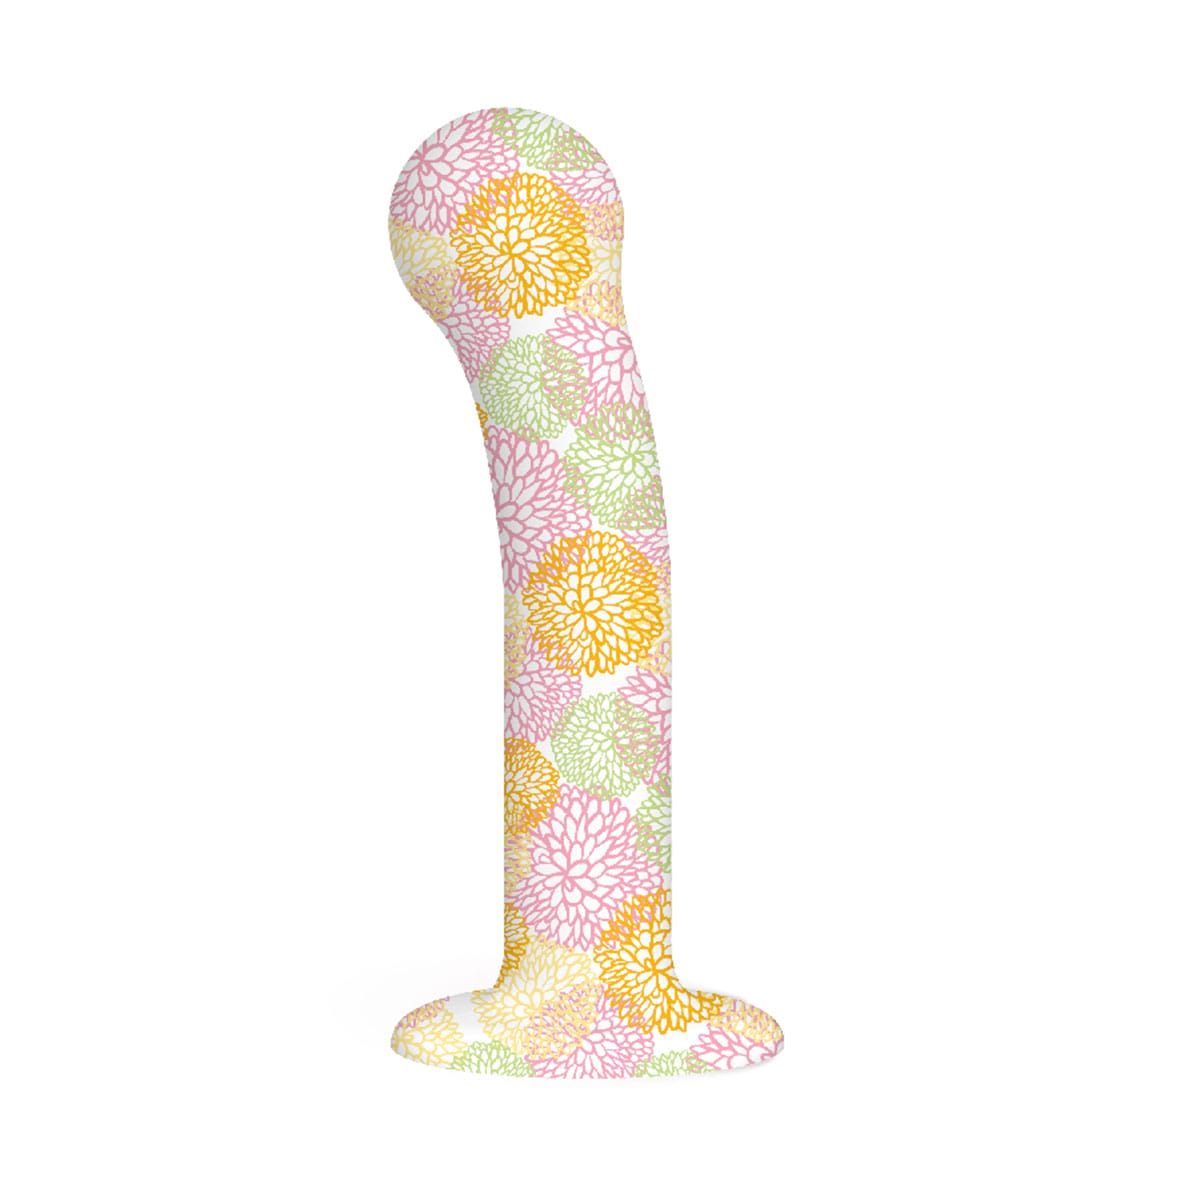 Buy Collage   Catch the Bouquet G Spot Dil 7 long and 1.25 thick dildo made by Icon Brands.